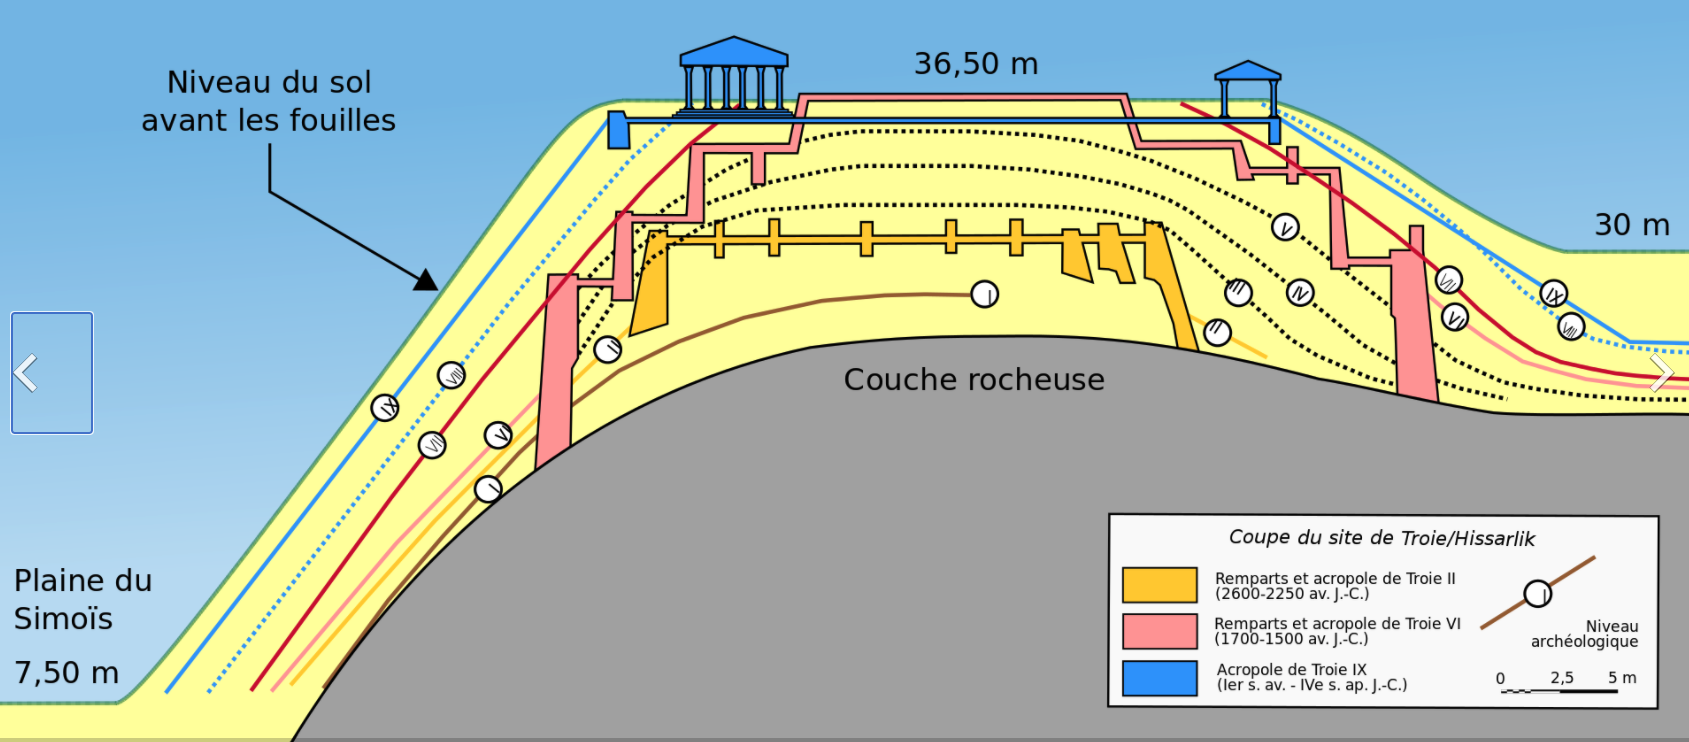 Section of the excavation of Troy reproduced from the Wikipedia.